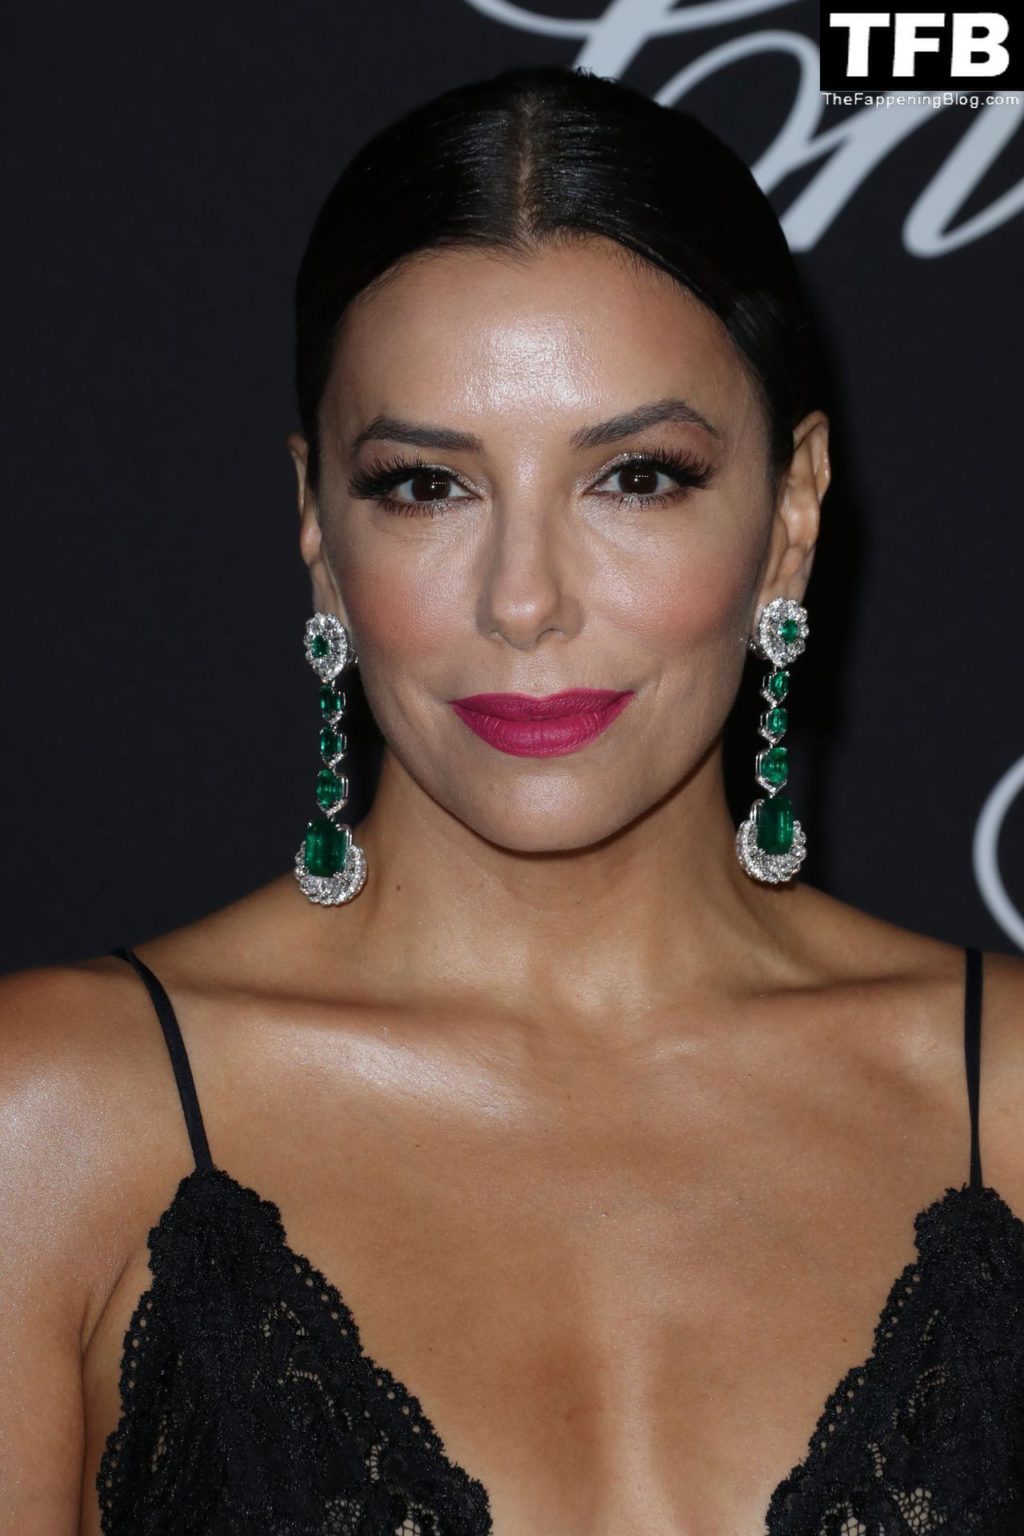 Eva Longoria Sexy The Fappening Blog 41 3 1024x1536 - Eva Longoria Shows Off Her Sexy Tits & Legs at the Chopard Loves Cinema Dinner Gala Night in Cannes (47 Photos)